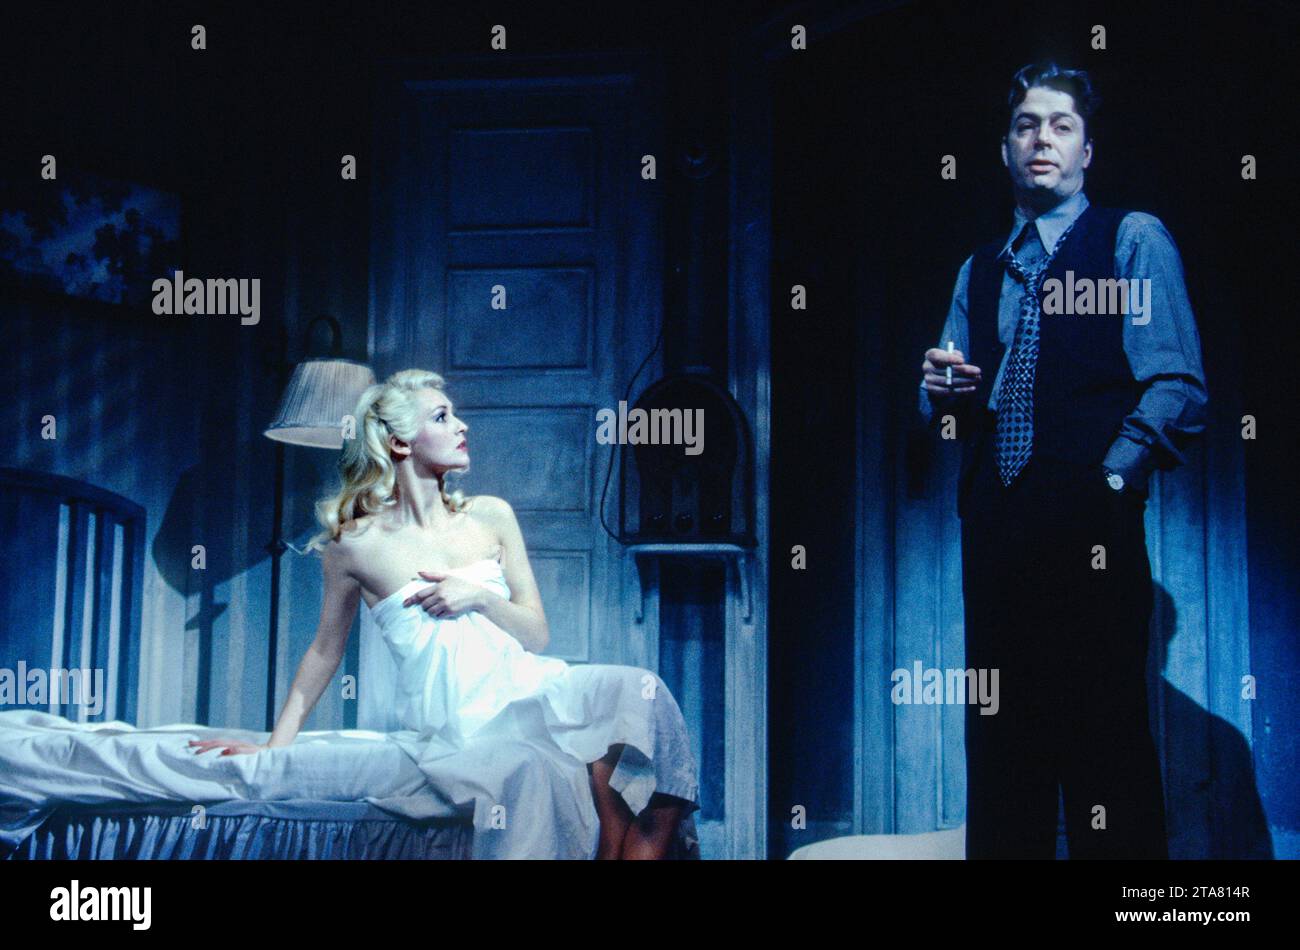 Sarah-Jane Hassell (Mallory Kingsley / Avril Raines), Roger Allam (Stone) in CITY OF ANGELS at the Prince of Wales Theatre, London W1  30/03/1993  book: Larry Gelbart  music: Cy Coleman  lyrics: David Zippel  set design: Robin Wagner  costumes: Florence Klotz  lighting: Paul Gallo  fights: B H Barry  musical staging: Walter Painter  director: Michael Blakemore Stock Photo